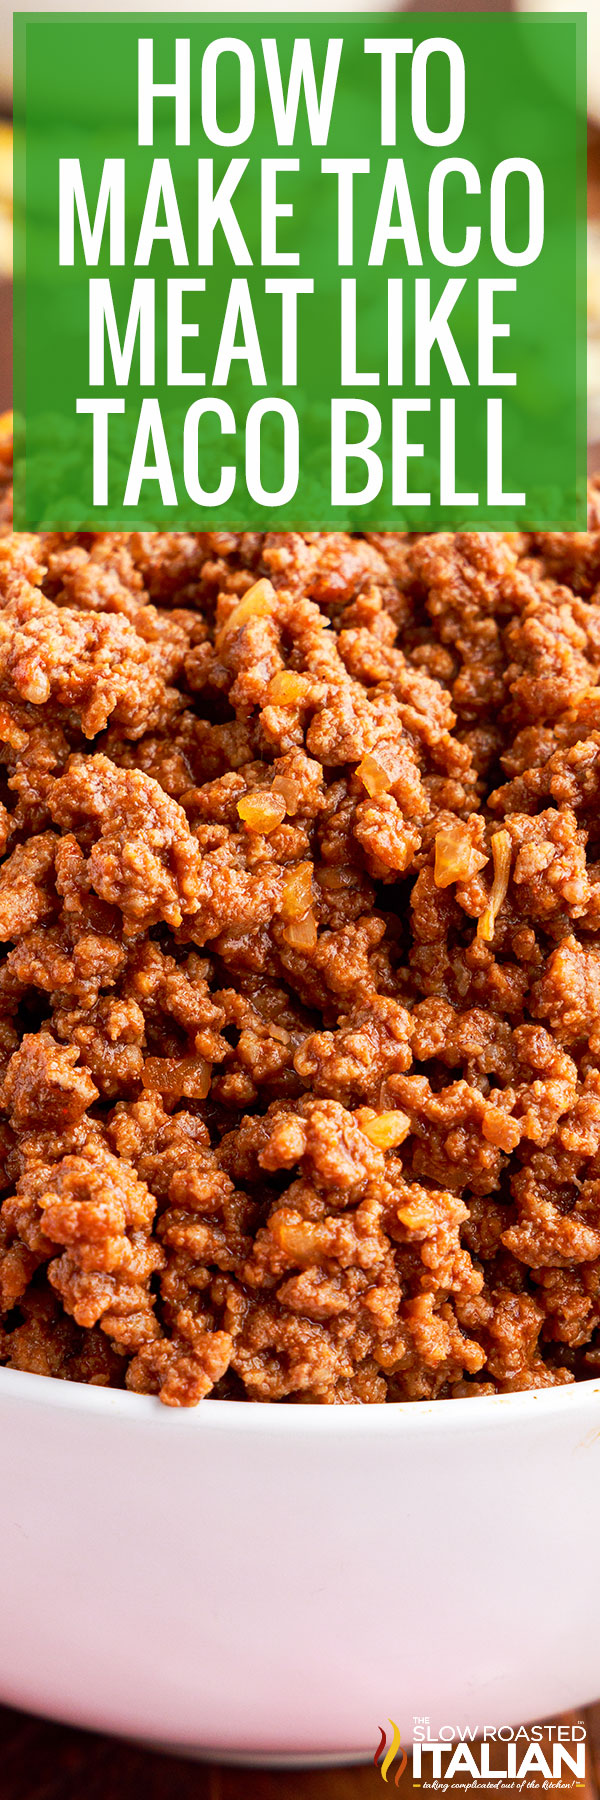 How to Make Taco Meat close up